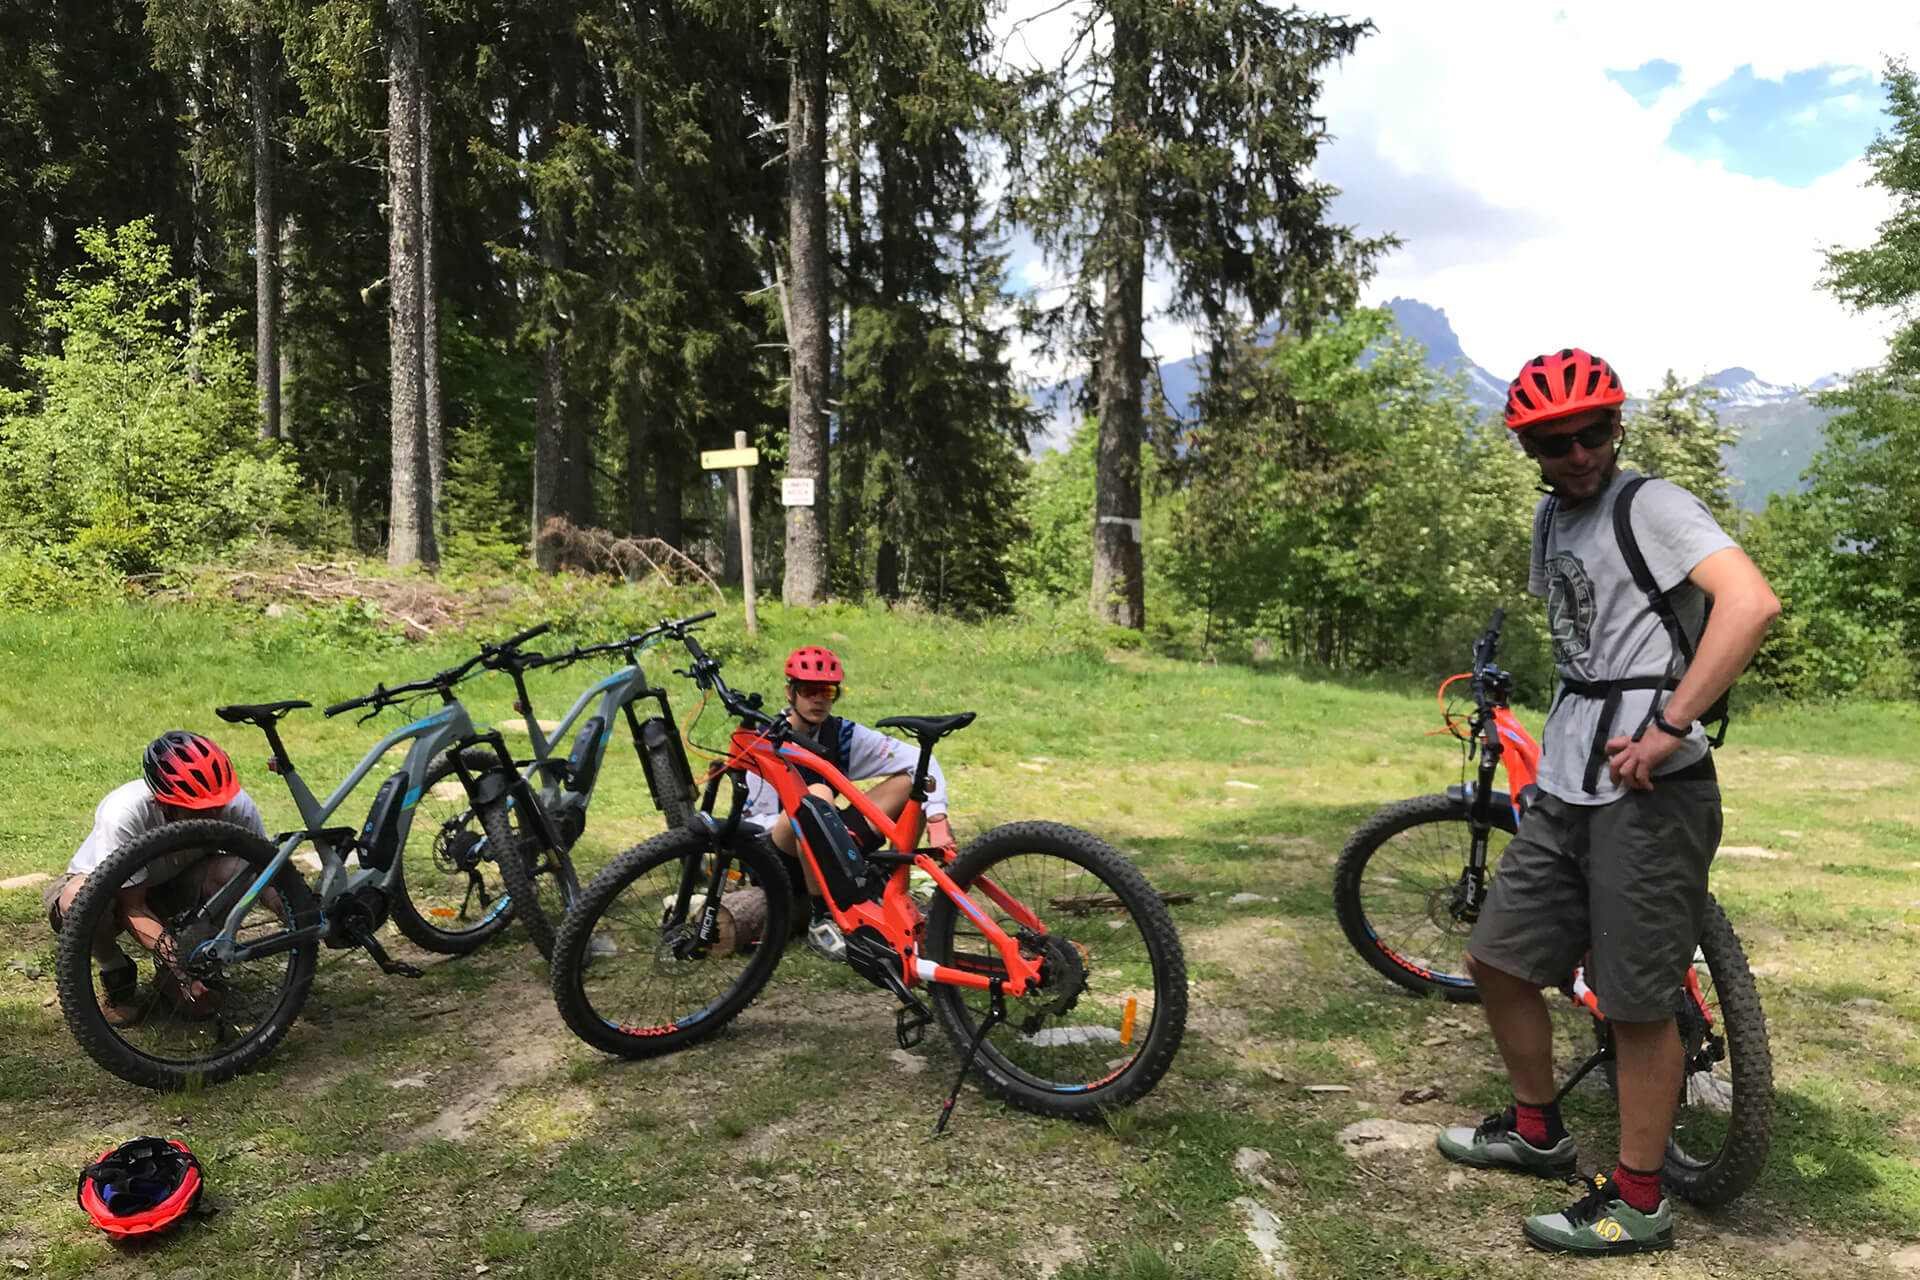 Different types of bikes available for rent for mountain rides in France